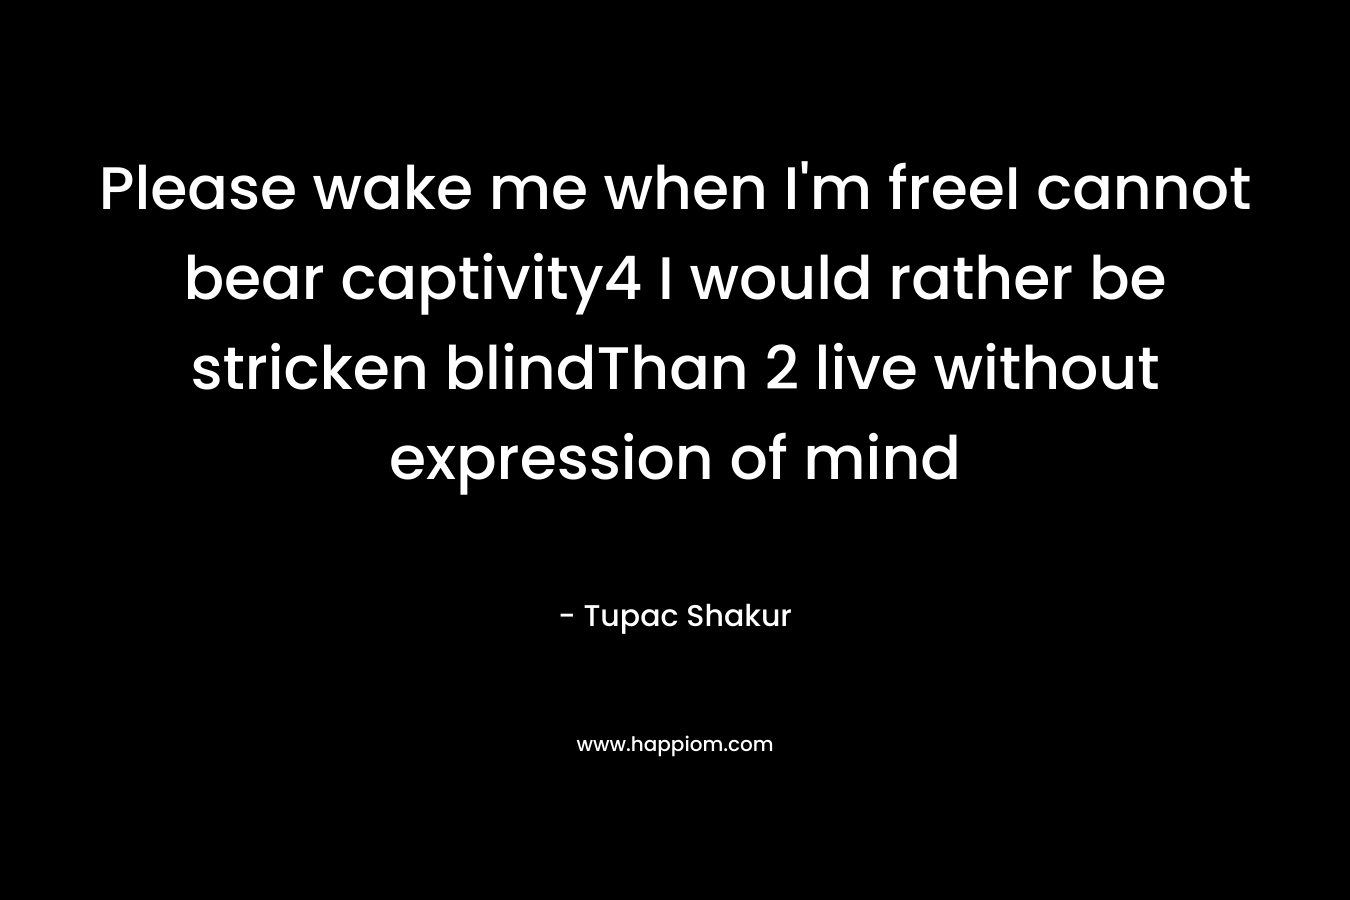 Please wake me when I’m freeI cannot bear captivity4 I would rather be stricken blindThan 2 live without expression of mind – Tupac Shakur